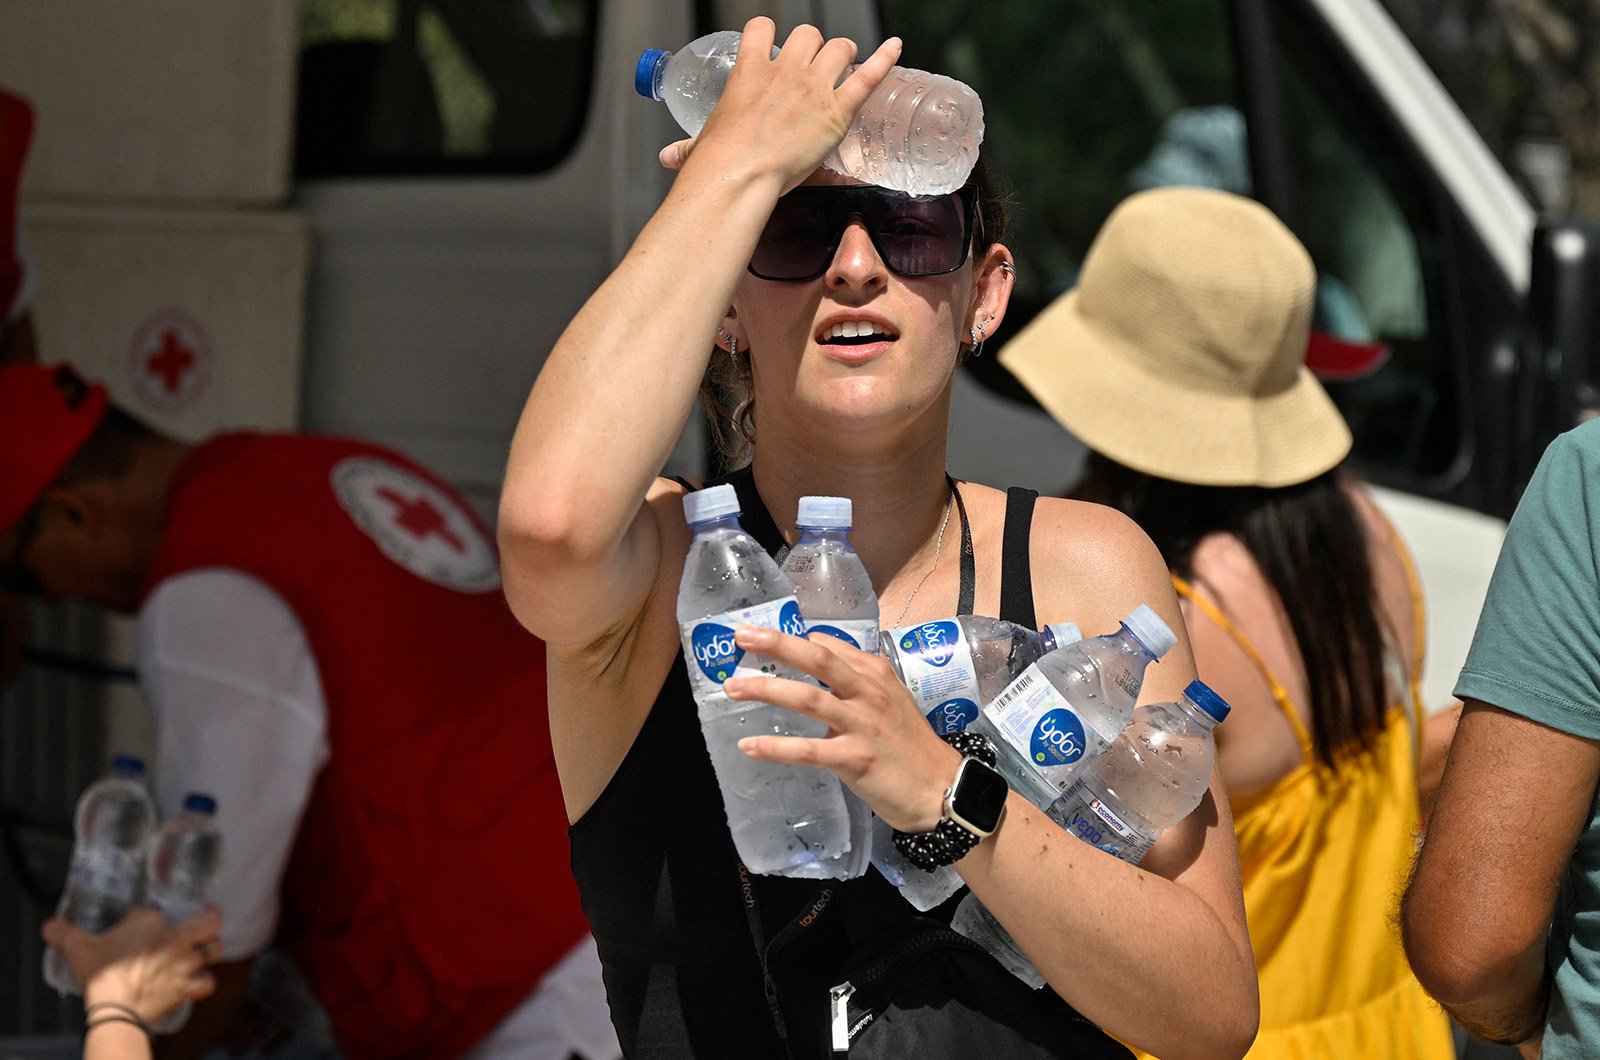 A woman cools off with cold bottles of water near the entrance of the Acropolis in Athens - July 20, 2023.